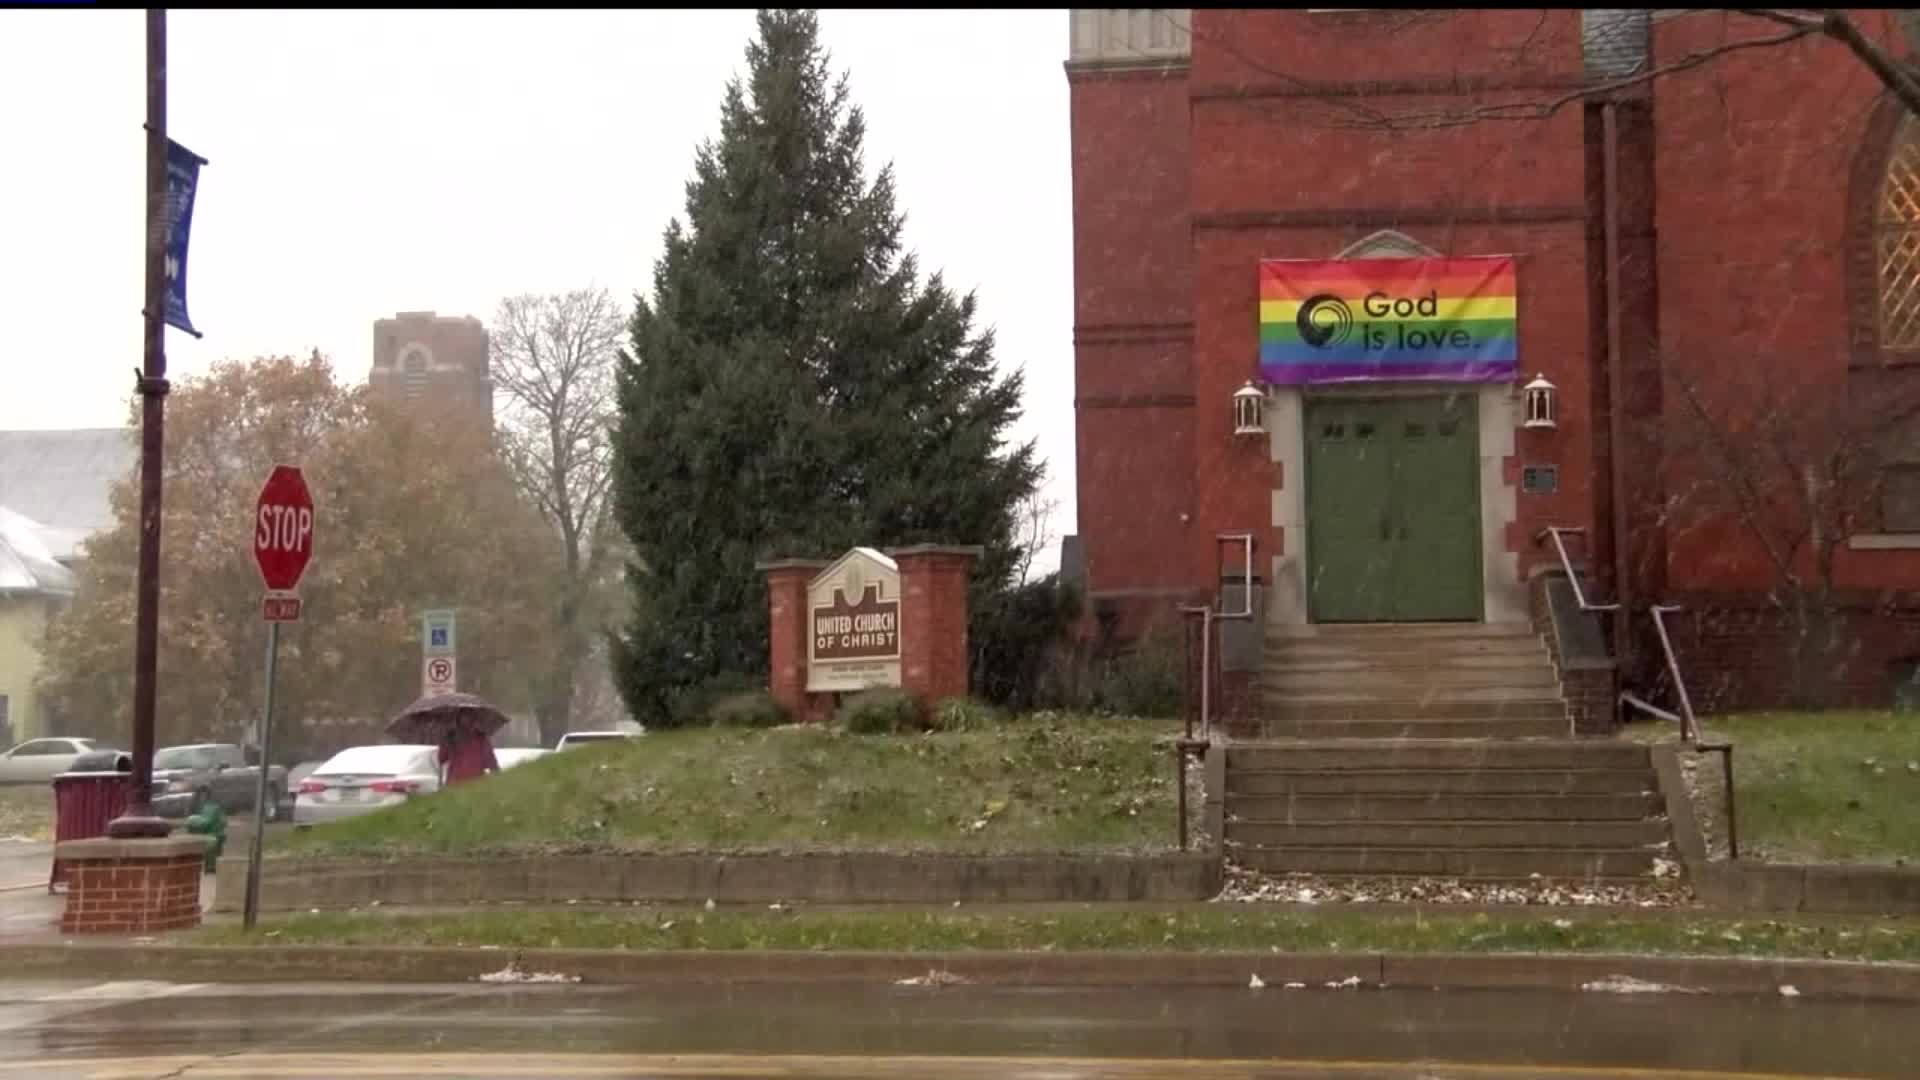 Man convicted of hate crime for tearing down LGBTQ flag